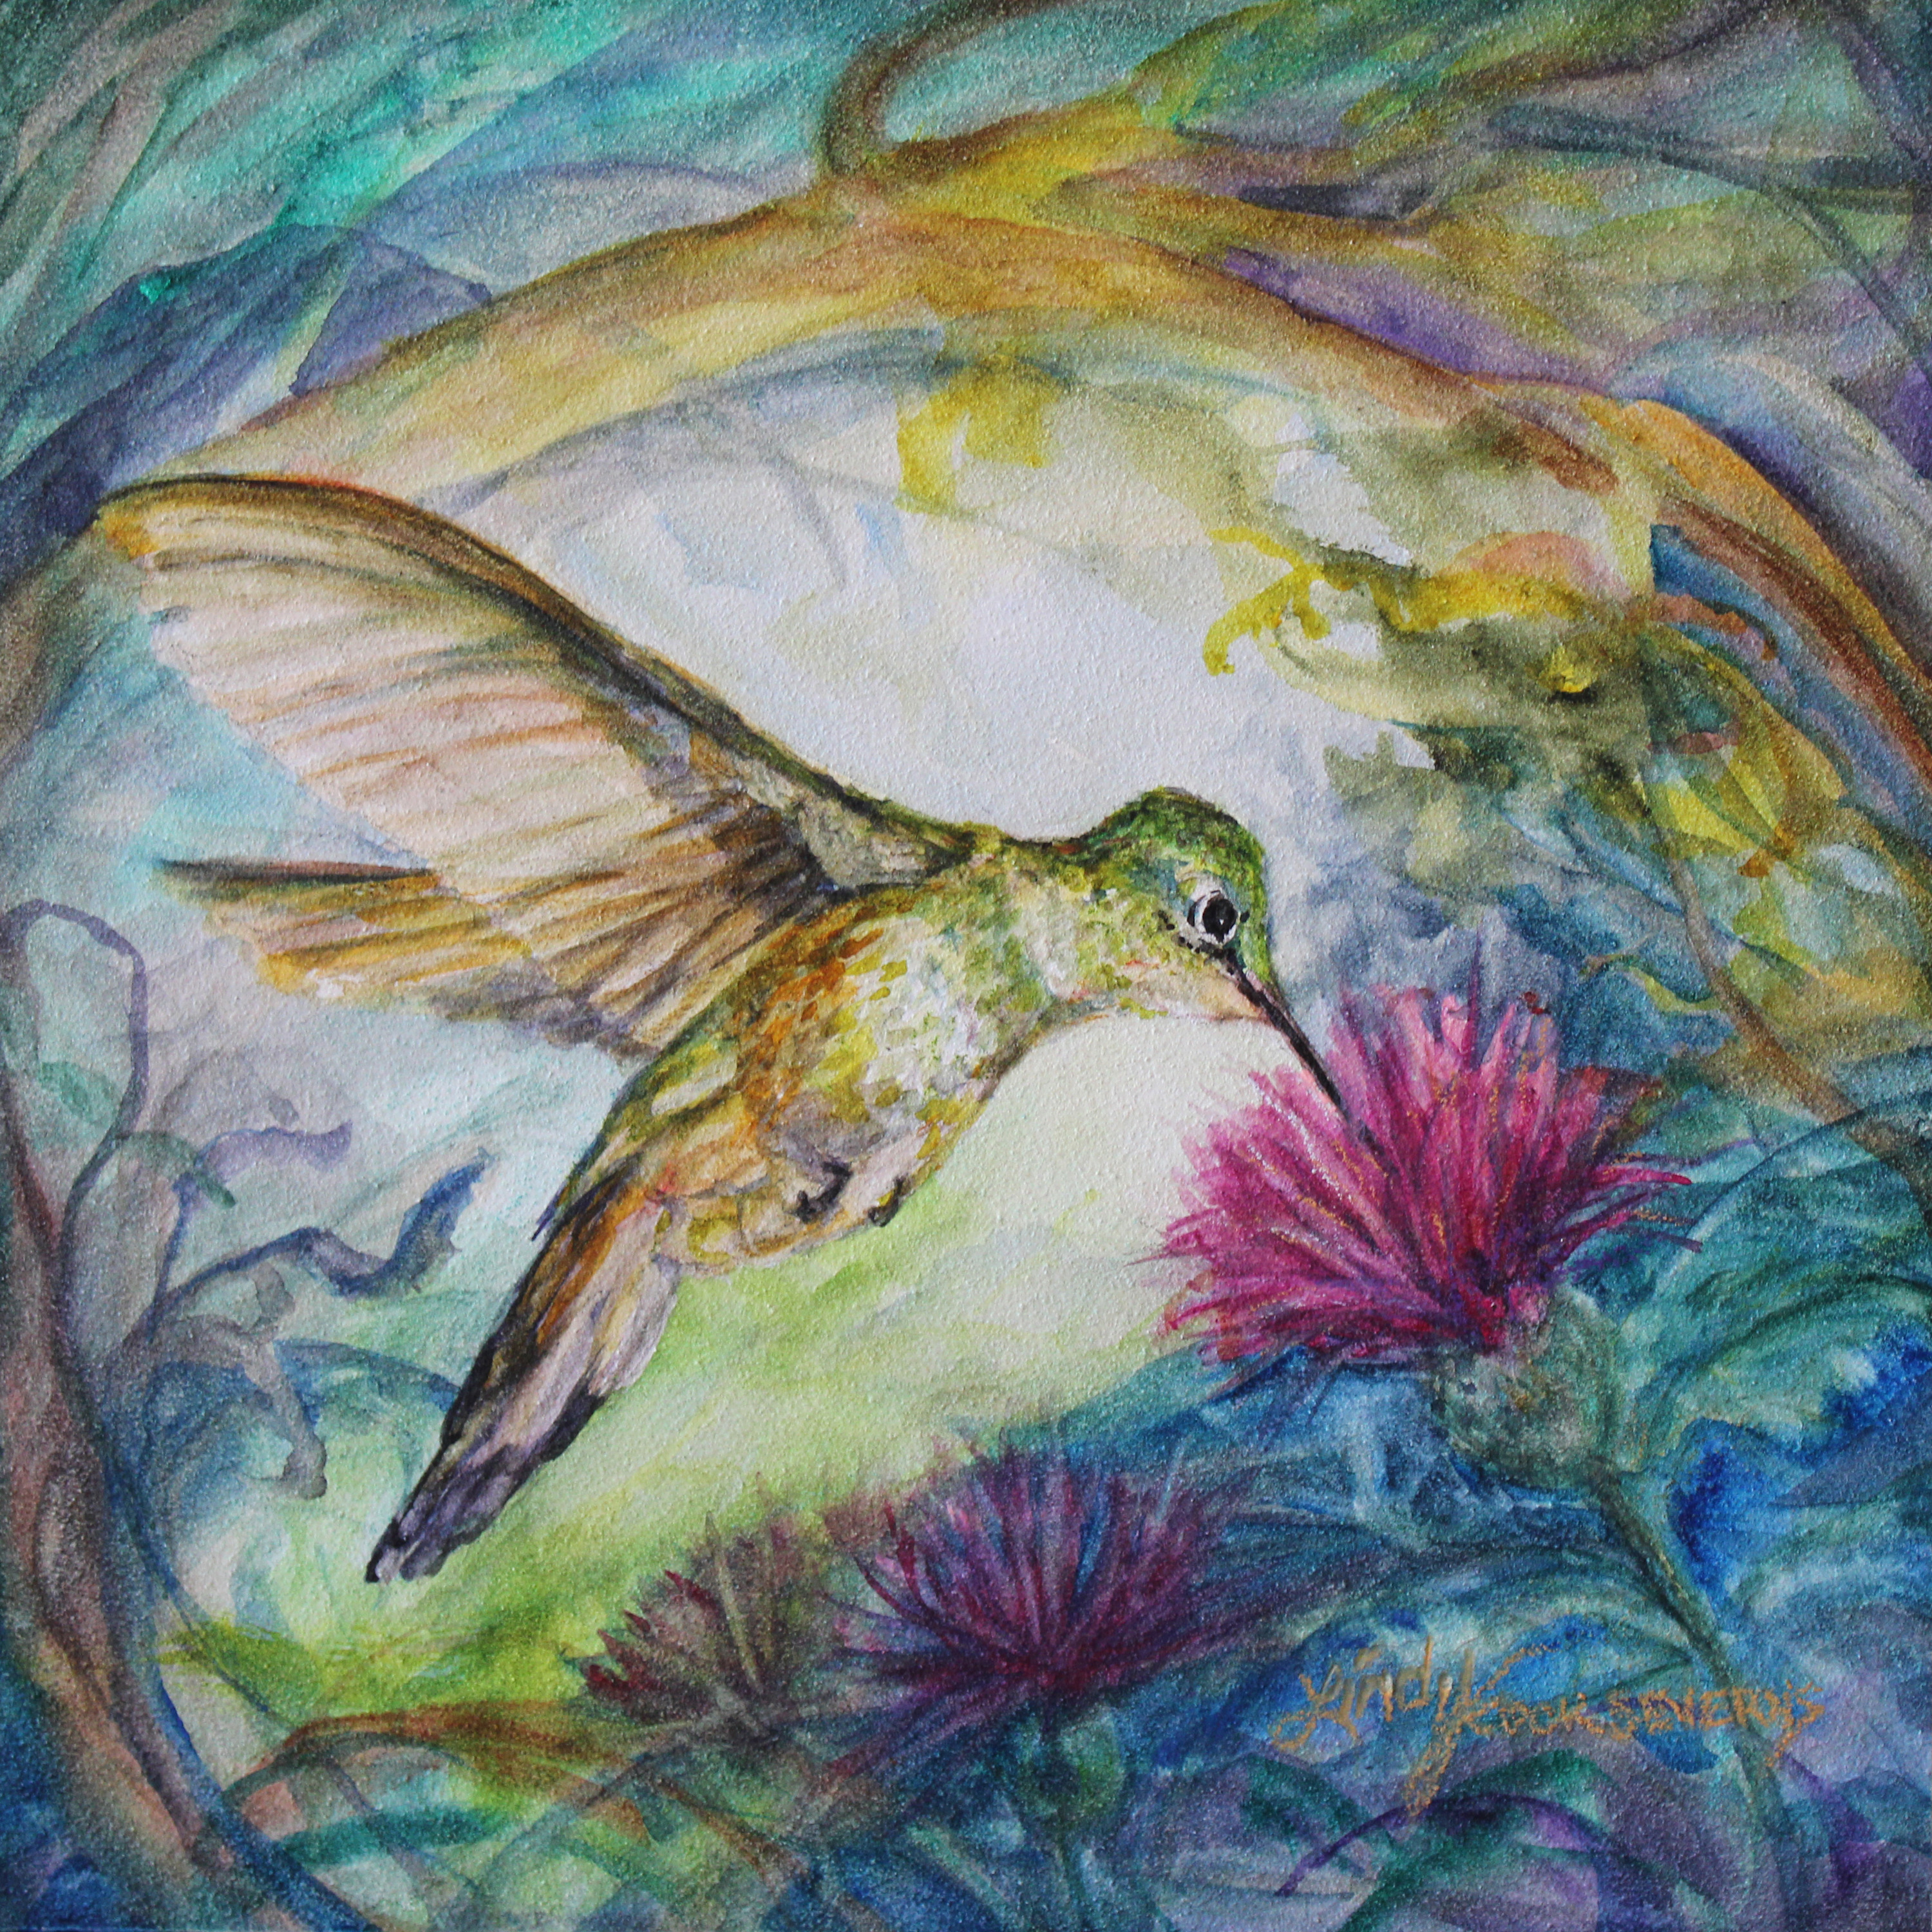 31g21 wings to a hidden world 8x8 v watercolor lindy c severns ltho7w